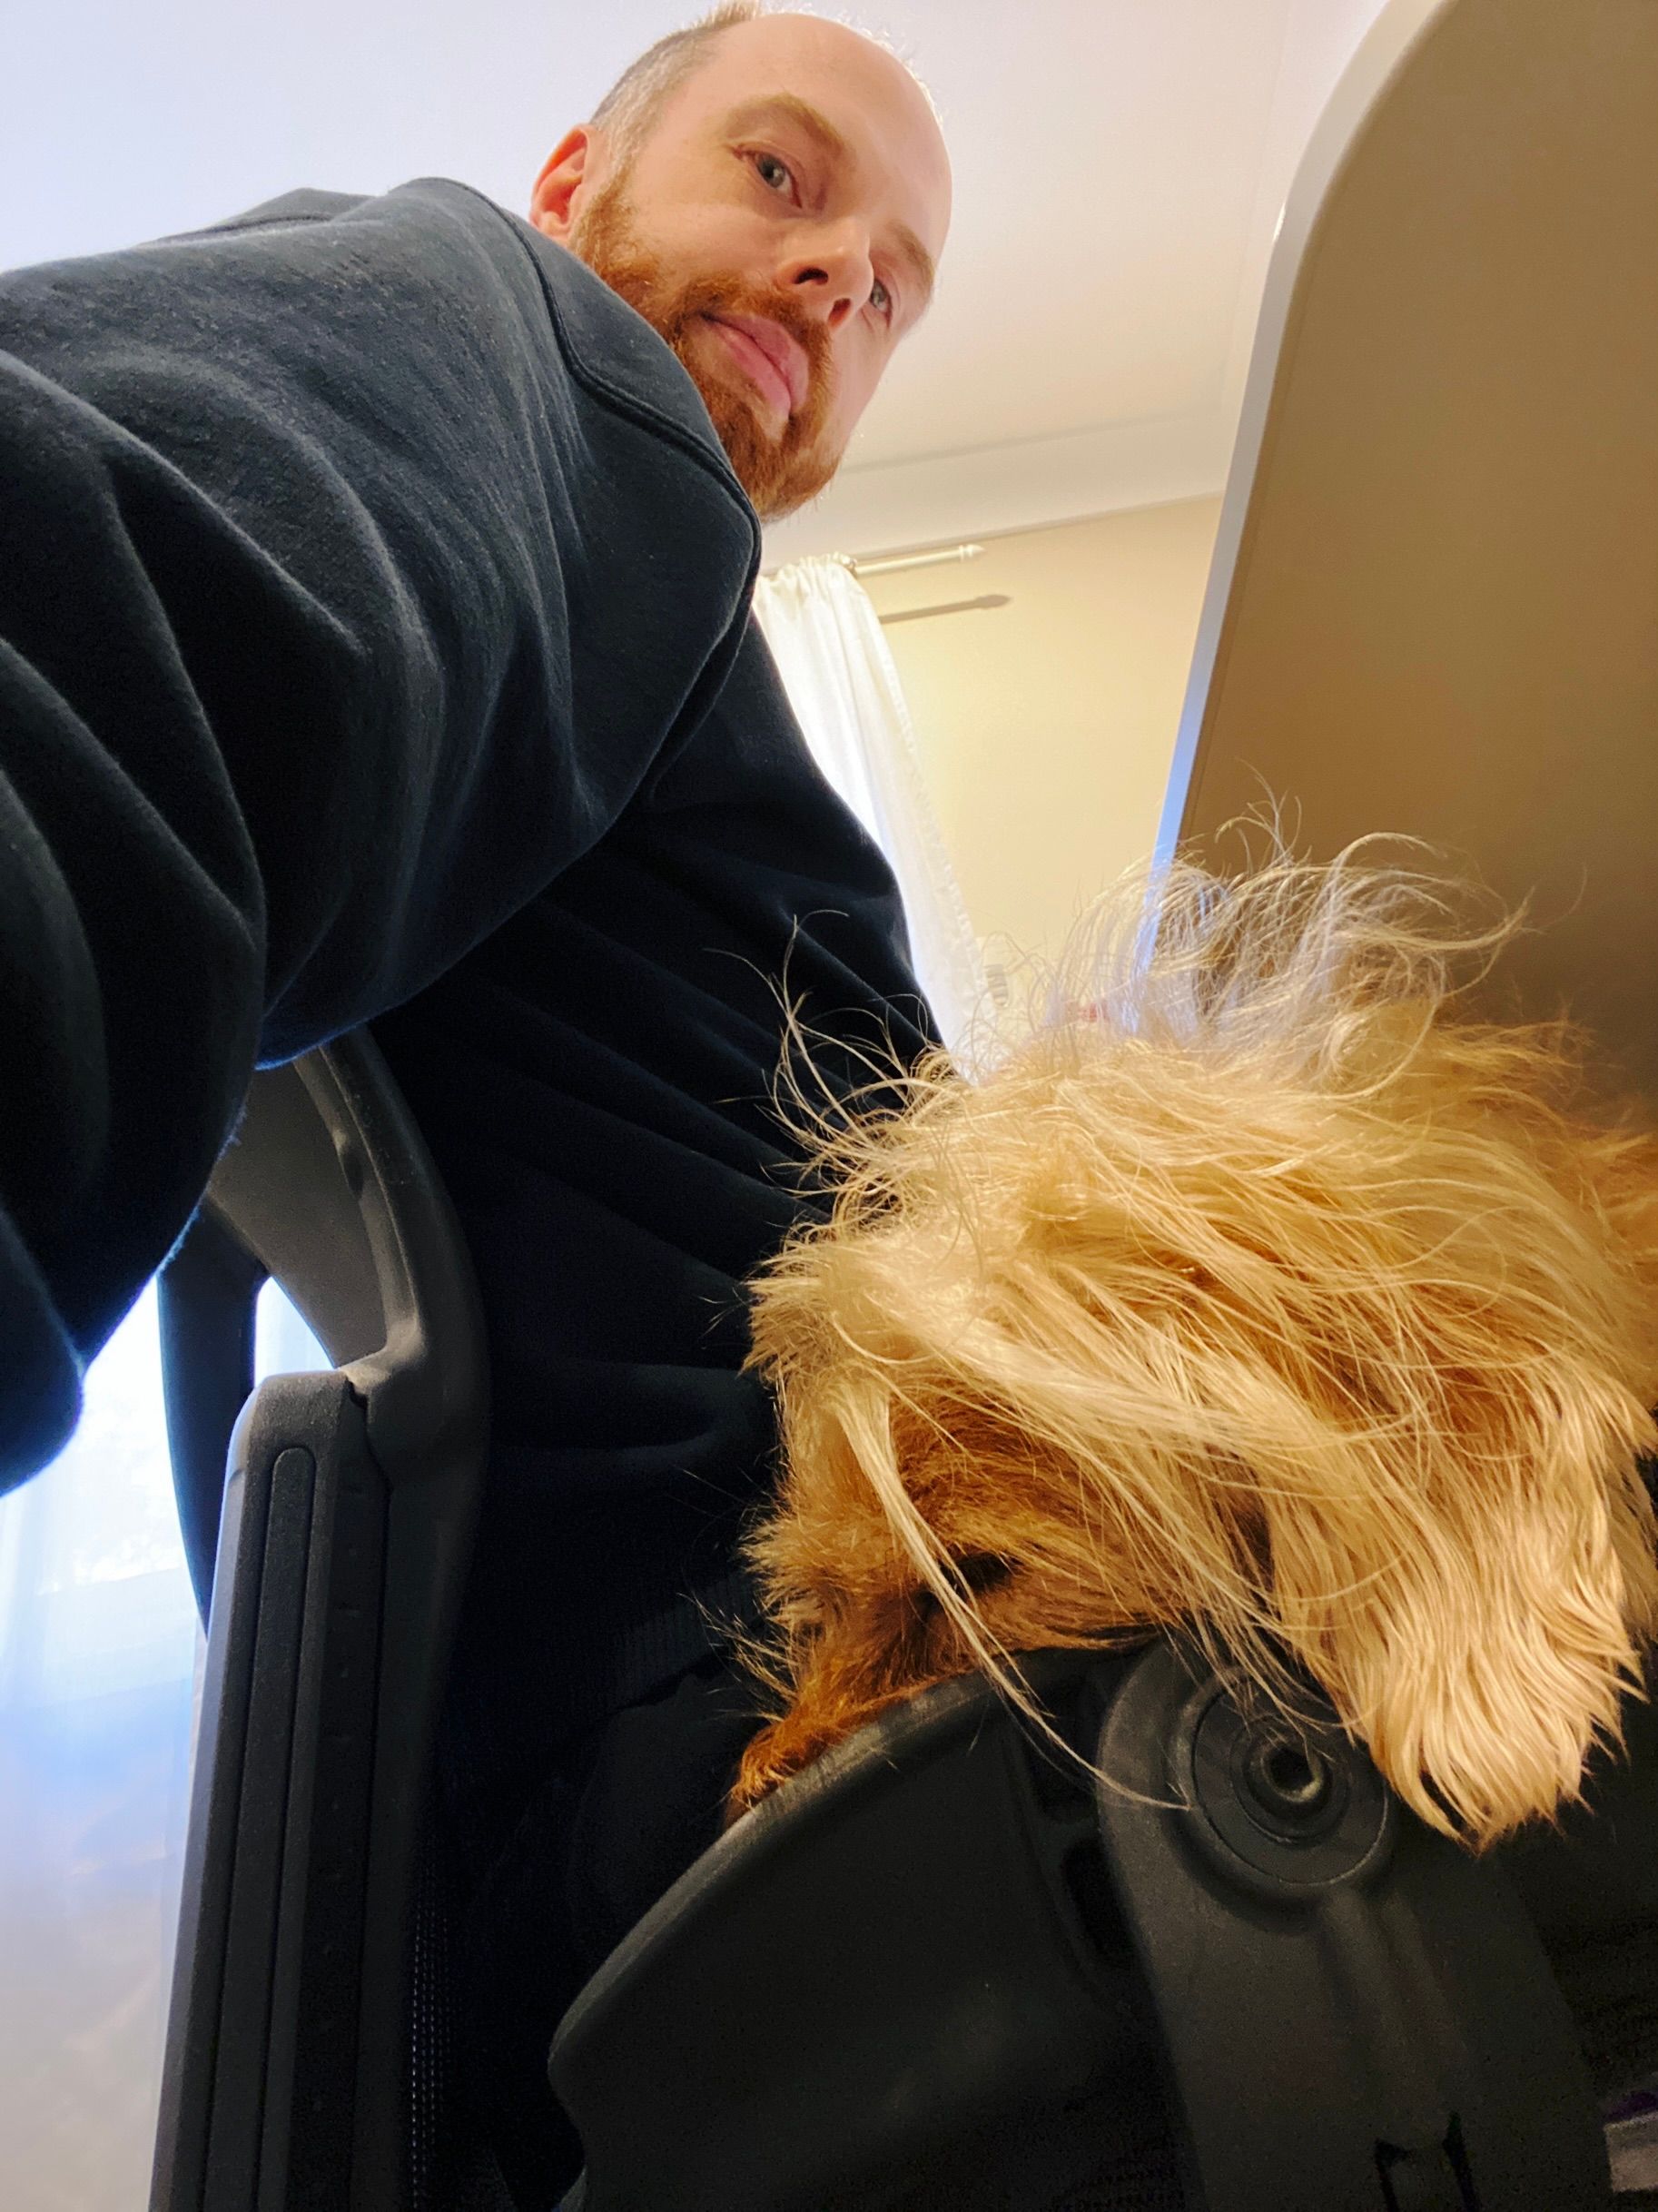 A selfie taken from a very low angle next to my chair. I'm a pale man with a red beard, and in my lap and partially curled around my side is a small scruffy blonde dog fast asleep with his snoot mushed in between my leg and the raised plastic bit at the edge of the chair.